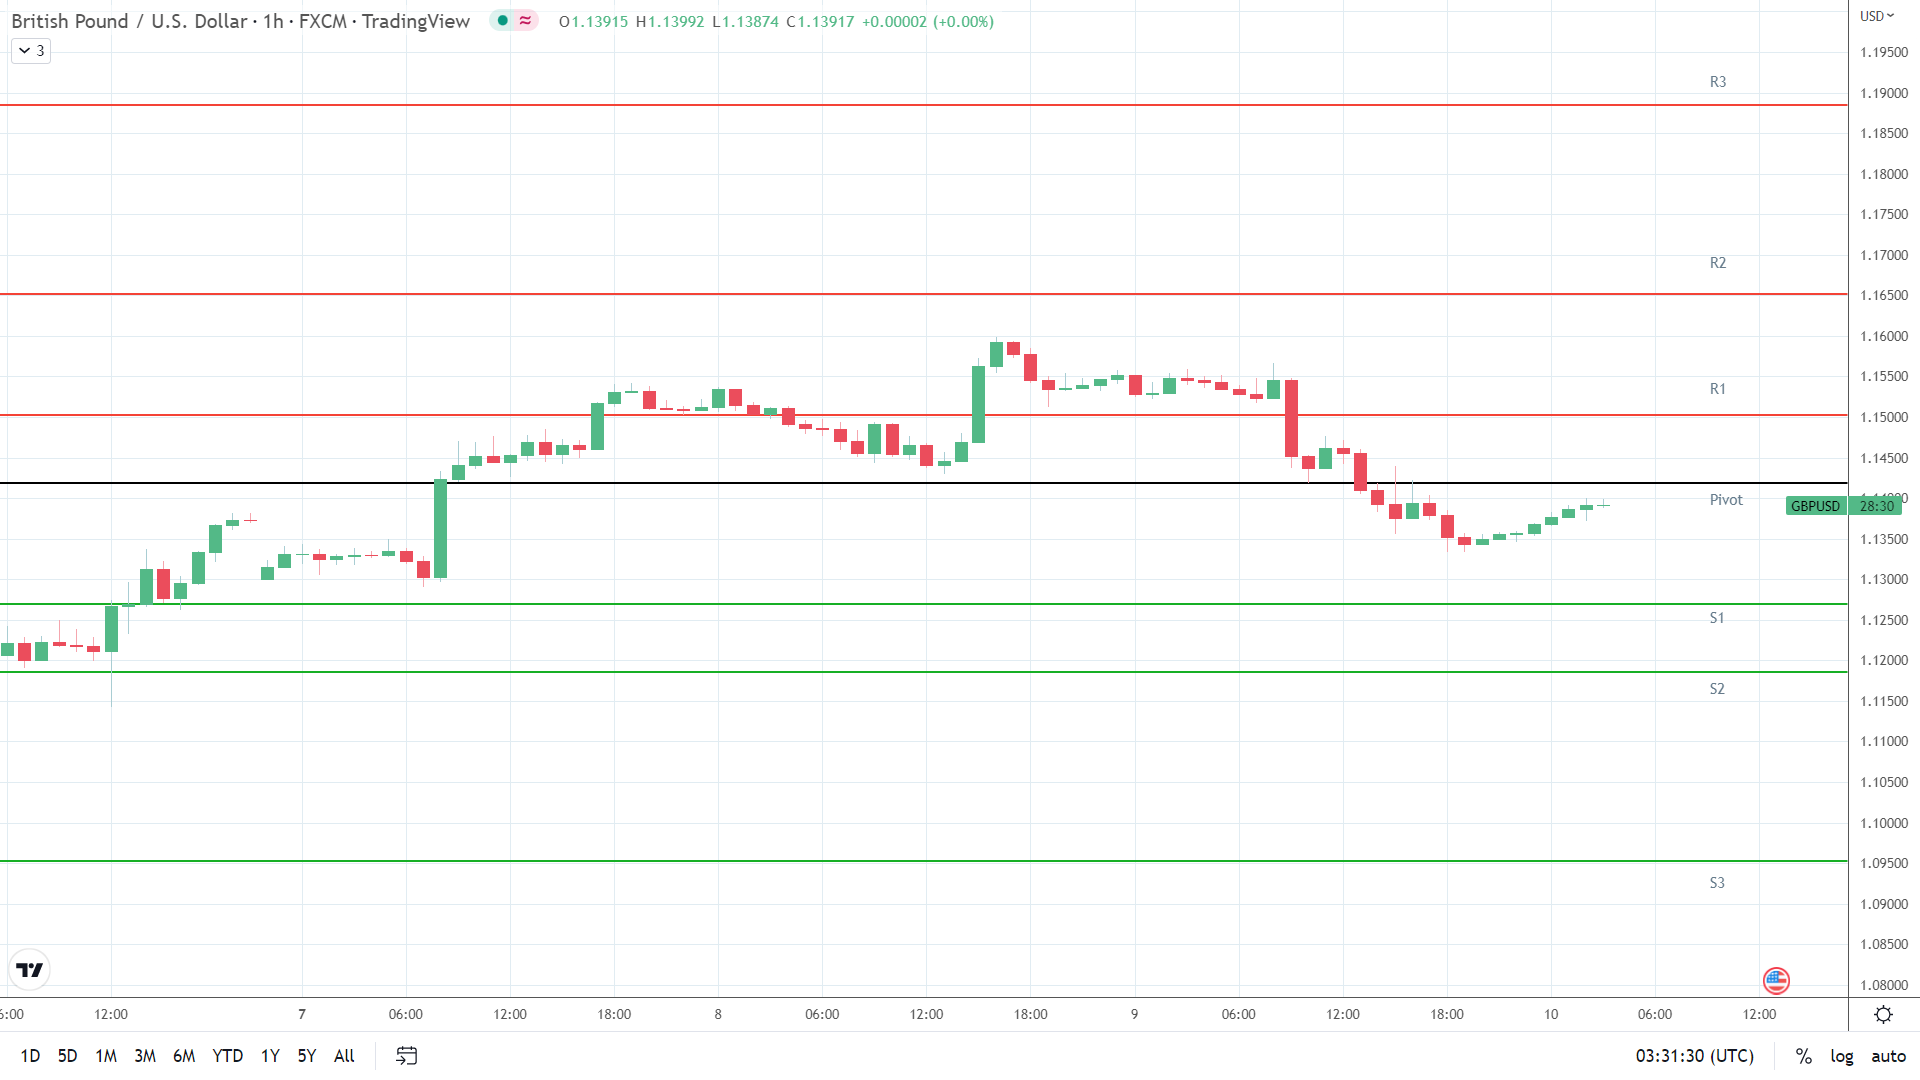 GBP/USD support levels in play.